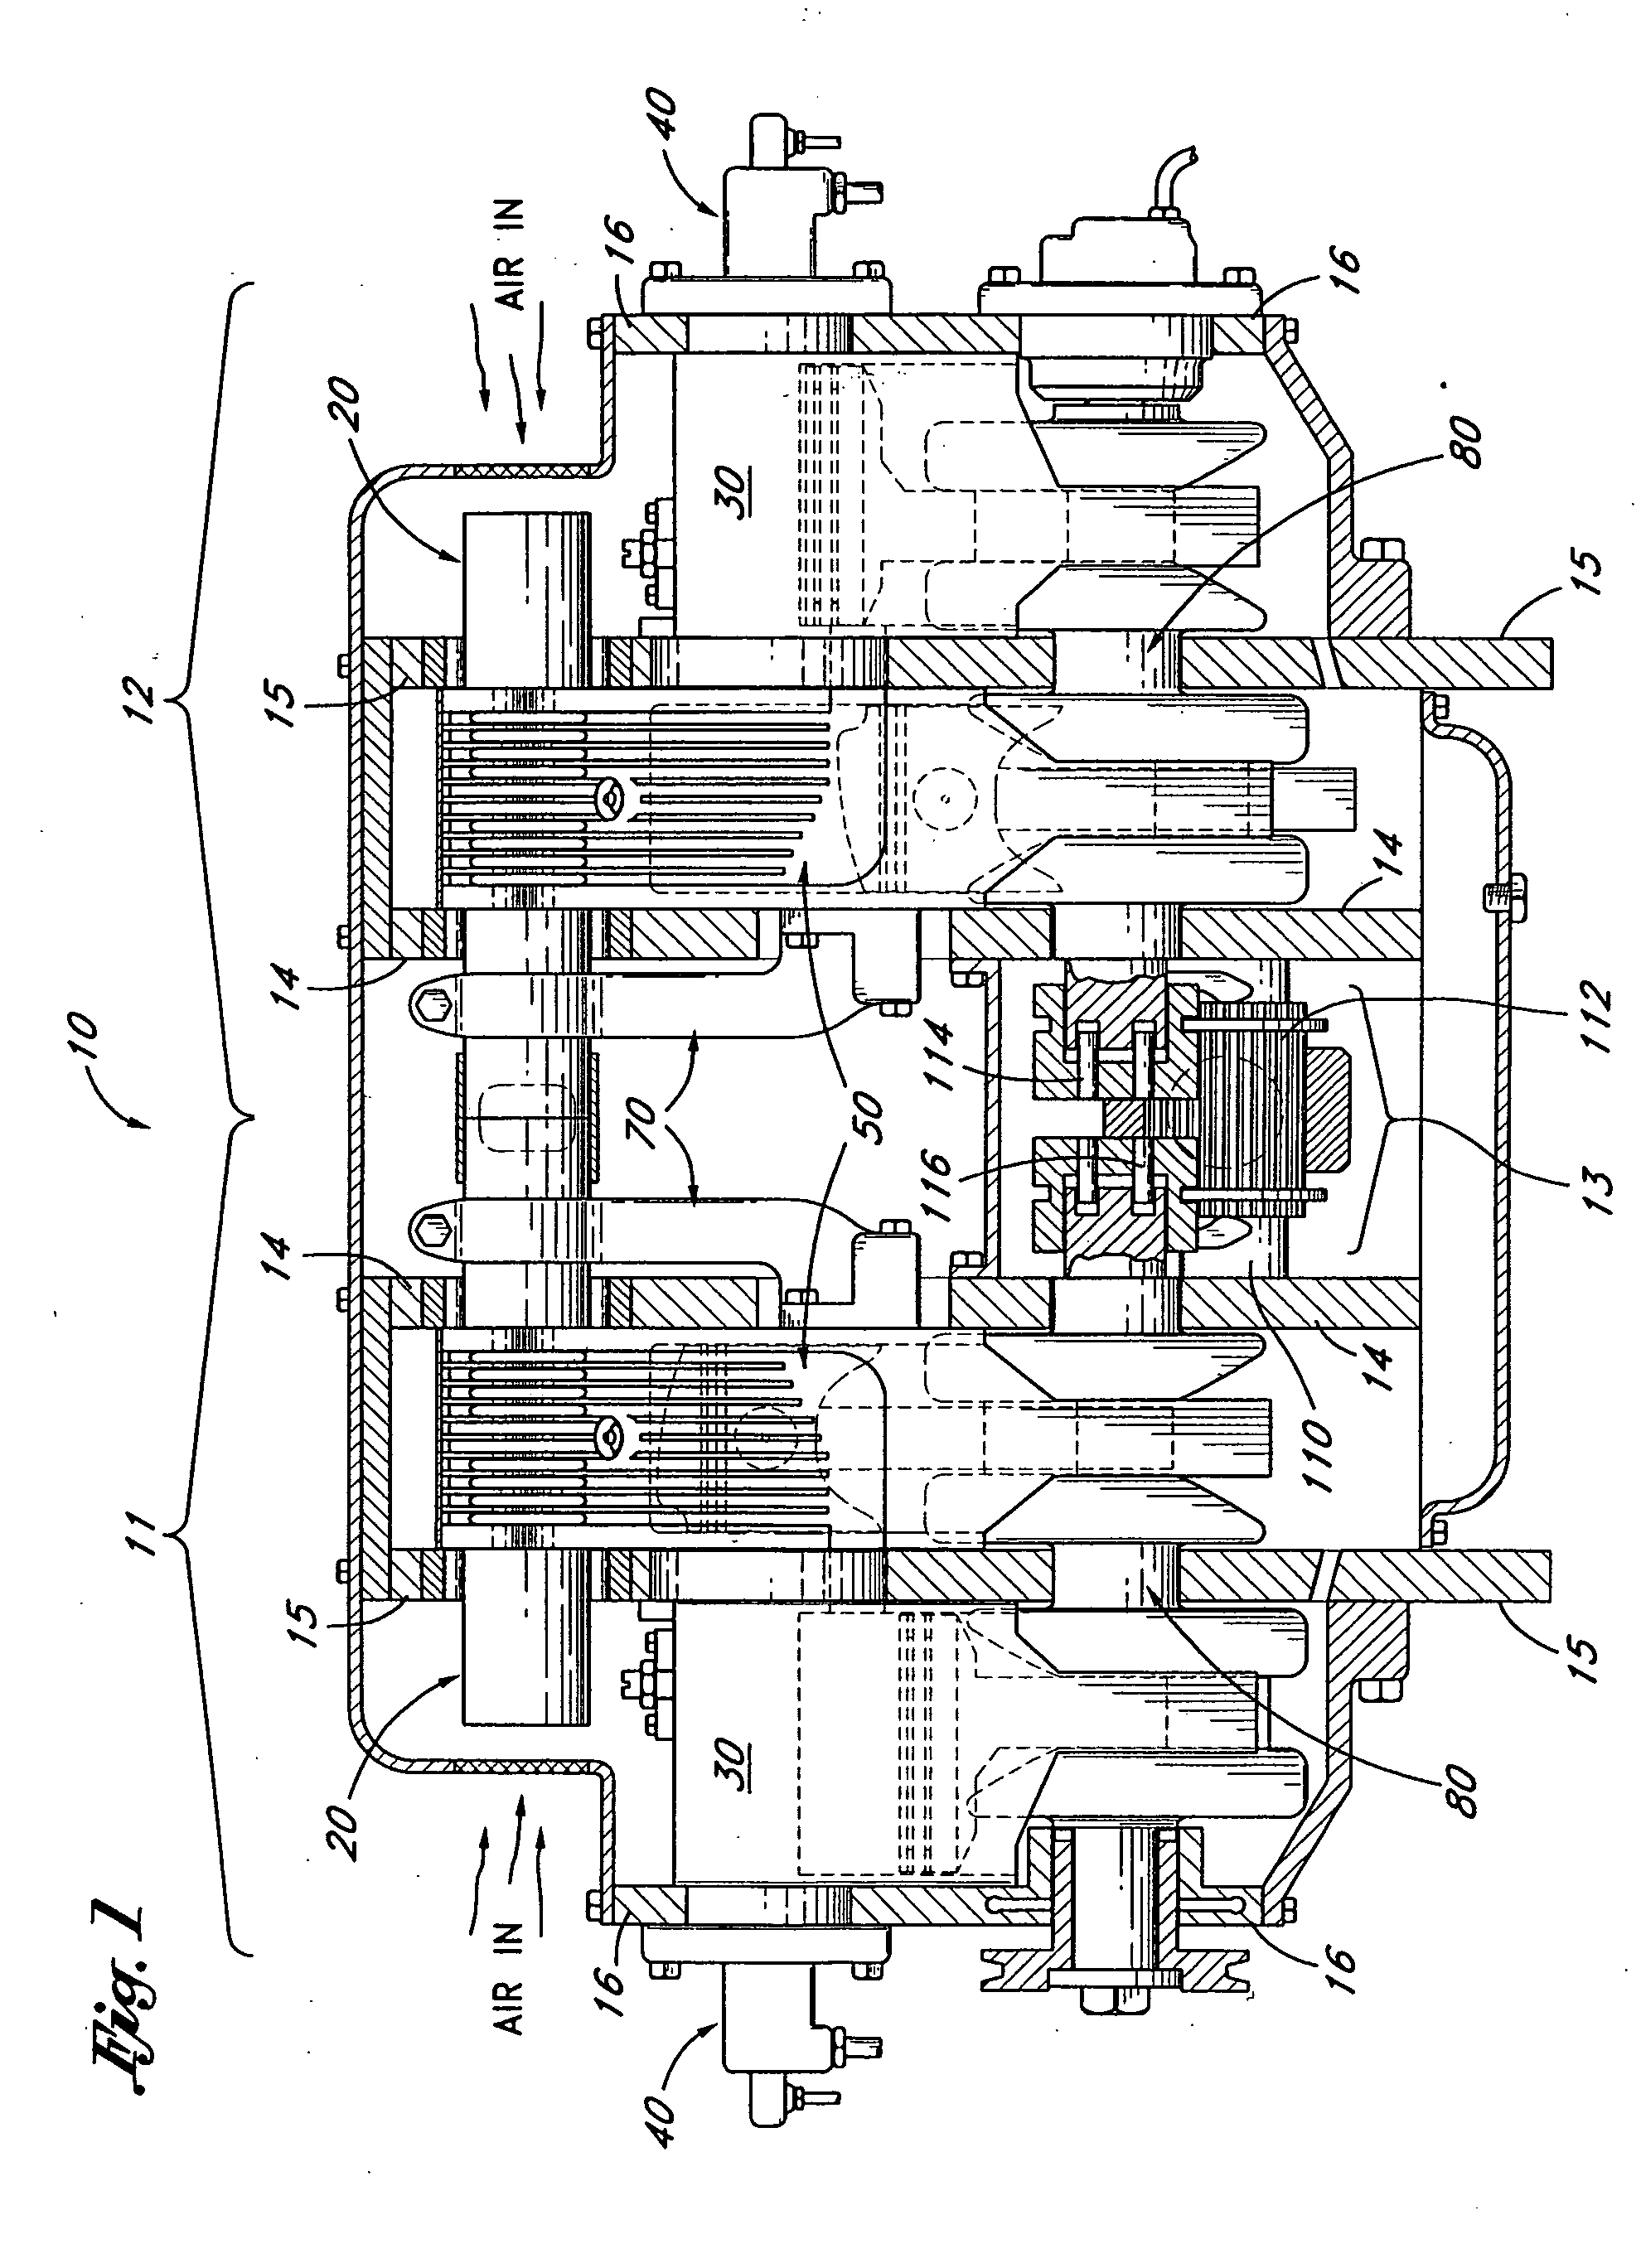 Internal combustion engine with actuating oscillating cylinders